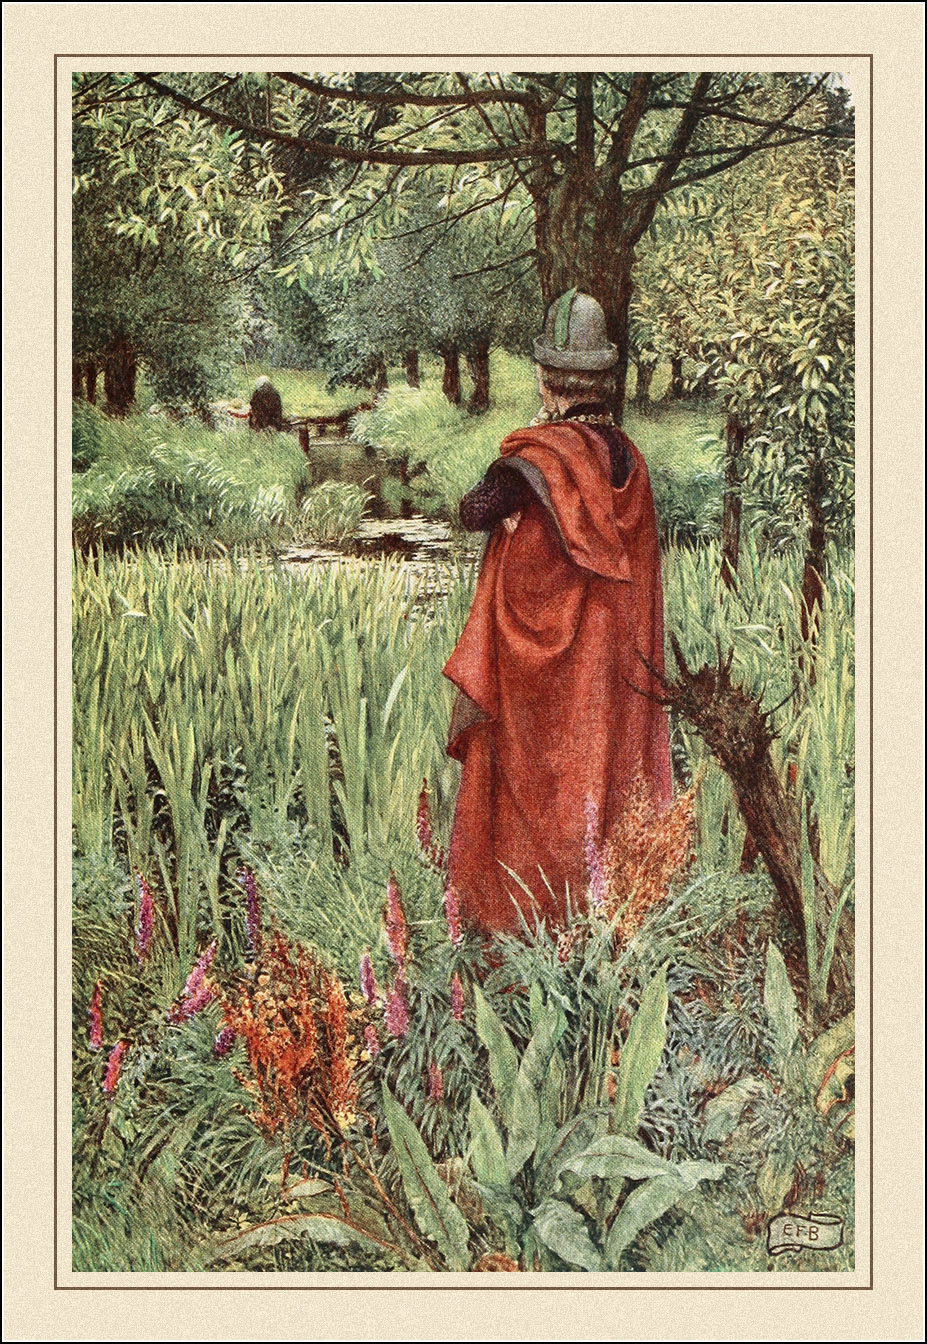 Eleanor Fortescue-Brickdale, Idylls of the King